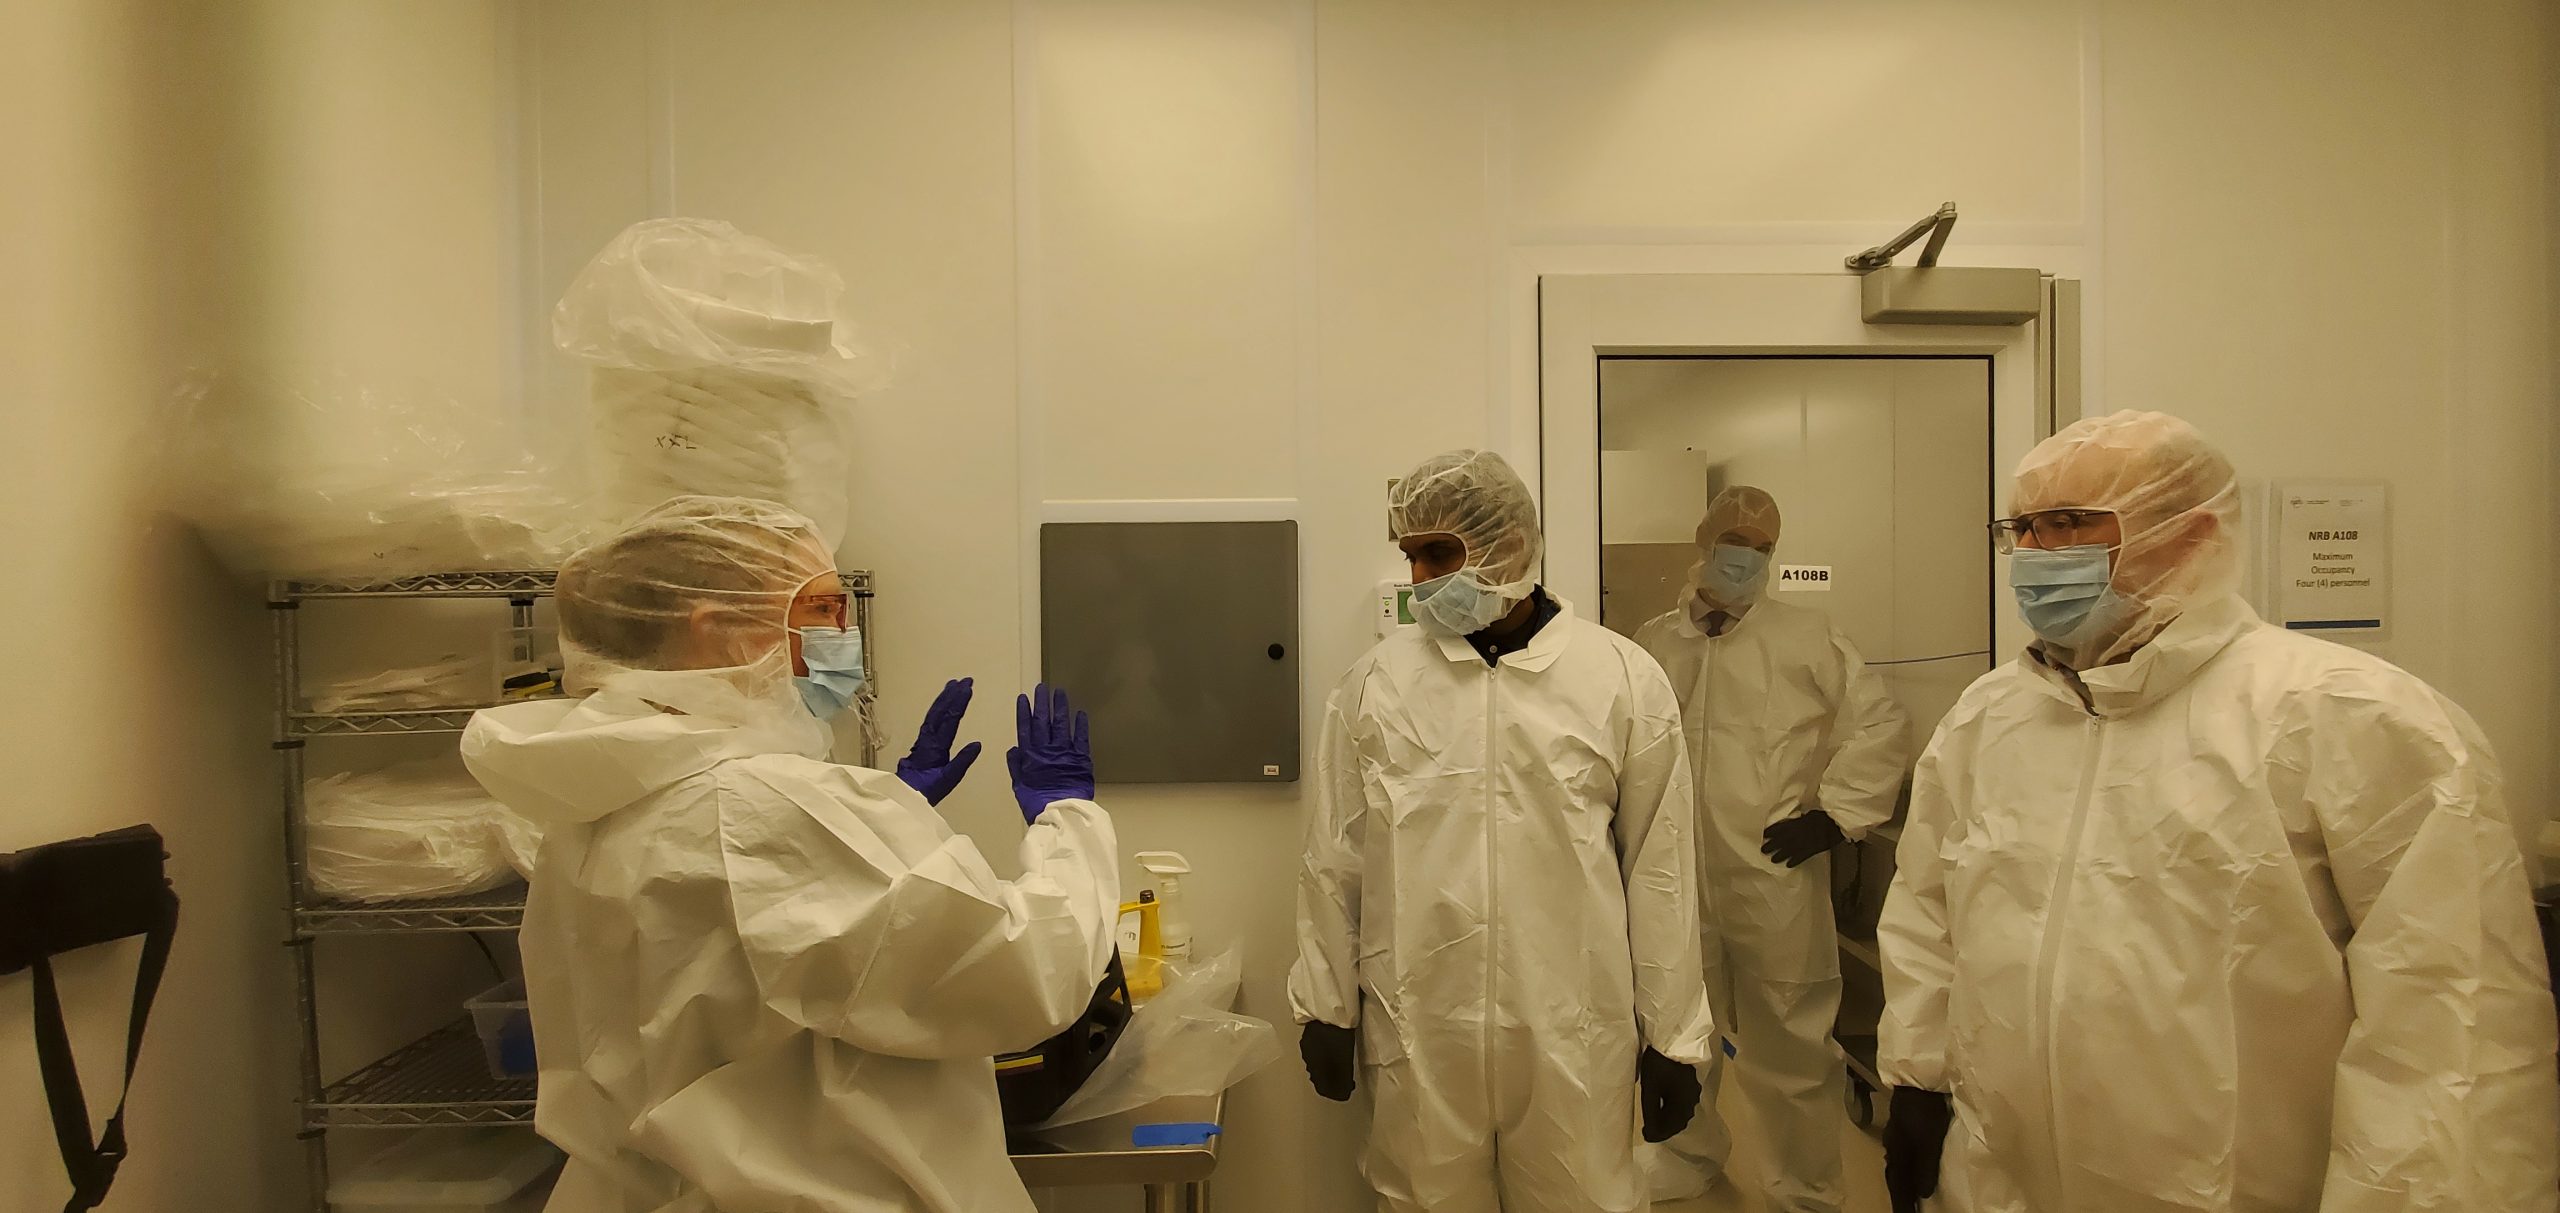 Inspectors wear personal protection equipment inside a laboratory at McMaster University.